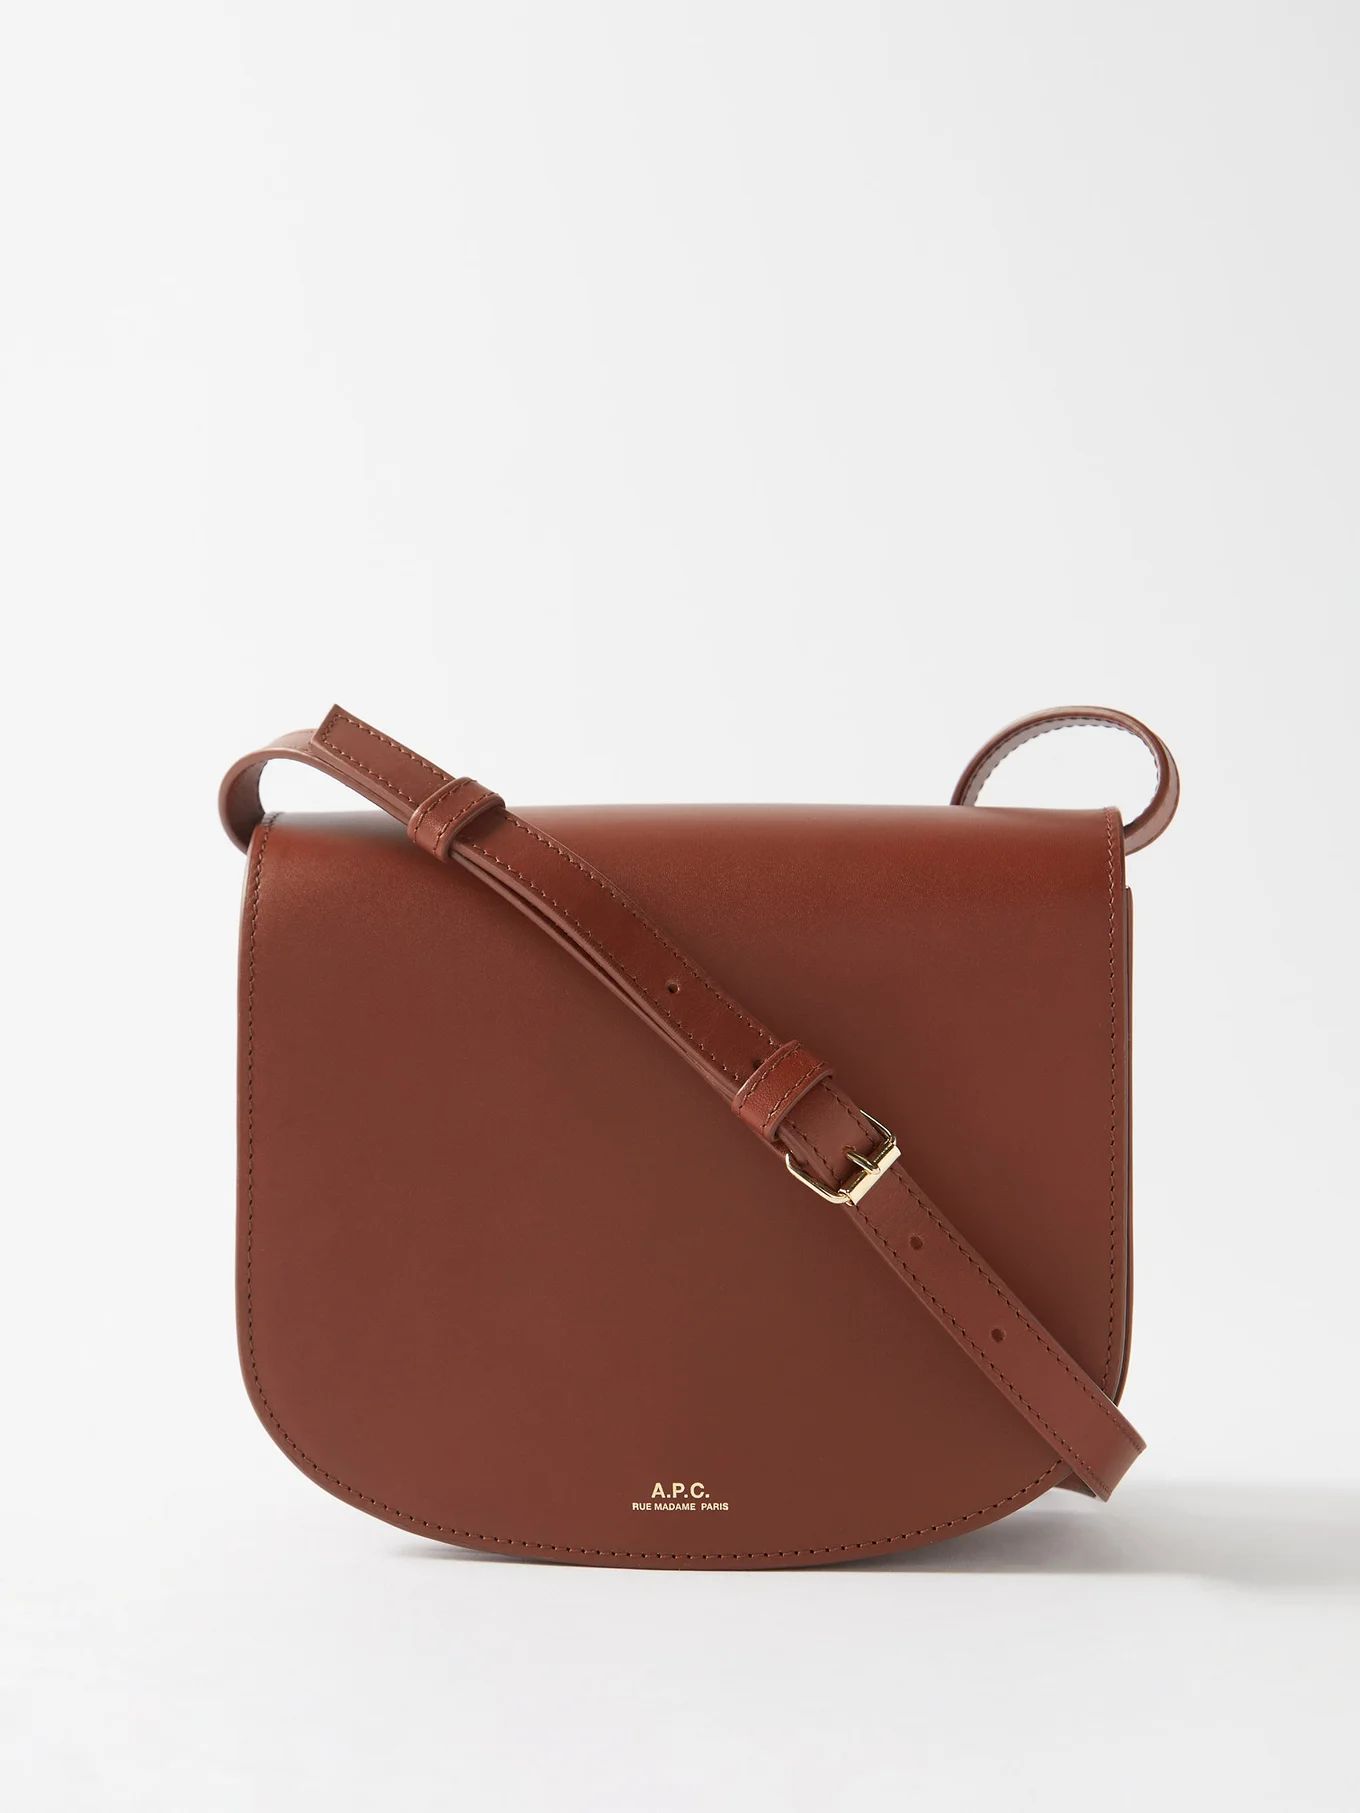 Dina leather cross-body bag | A.P.C. | Matches (US)